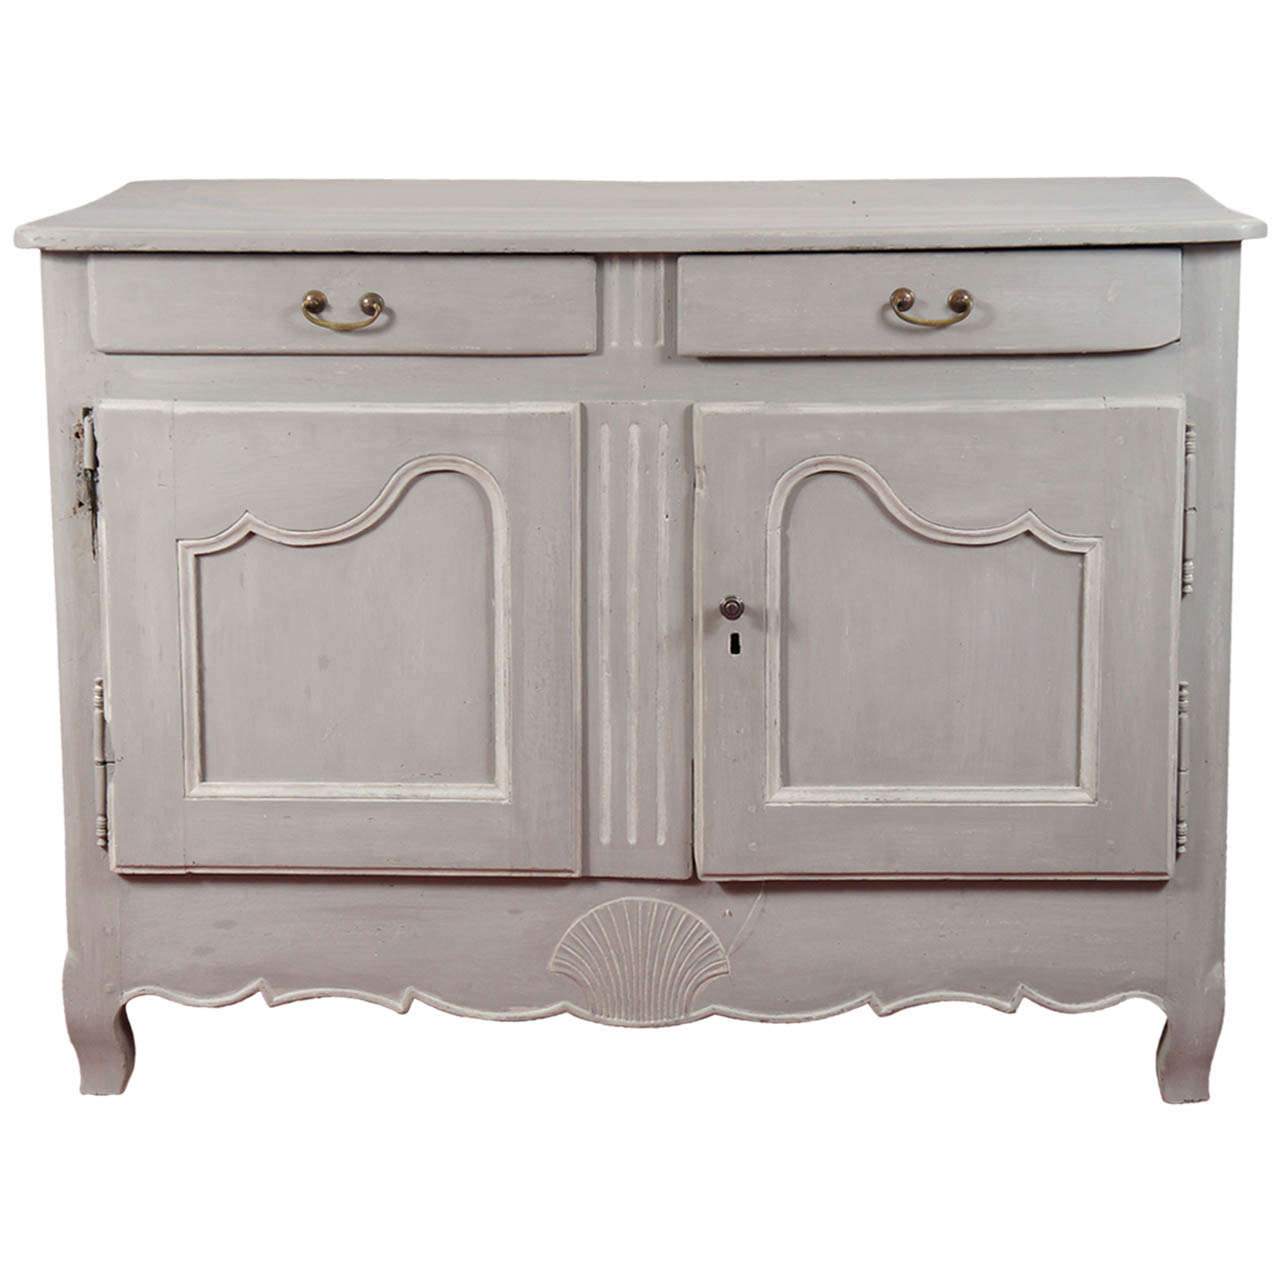 19th Century French Provincial Sideboard For Sale